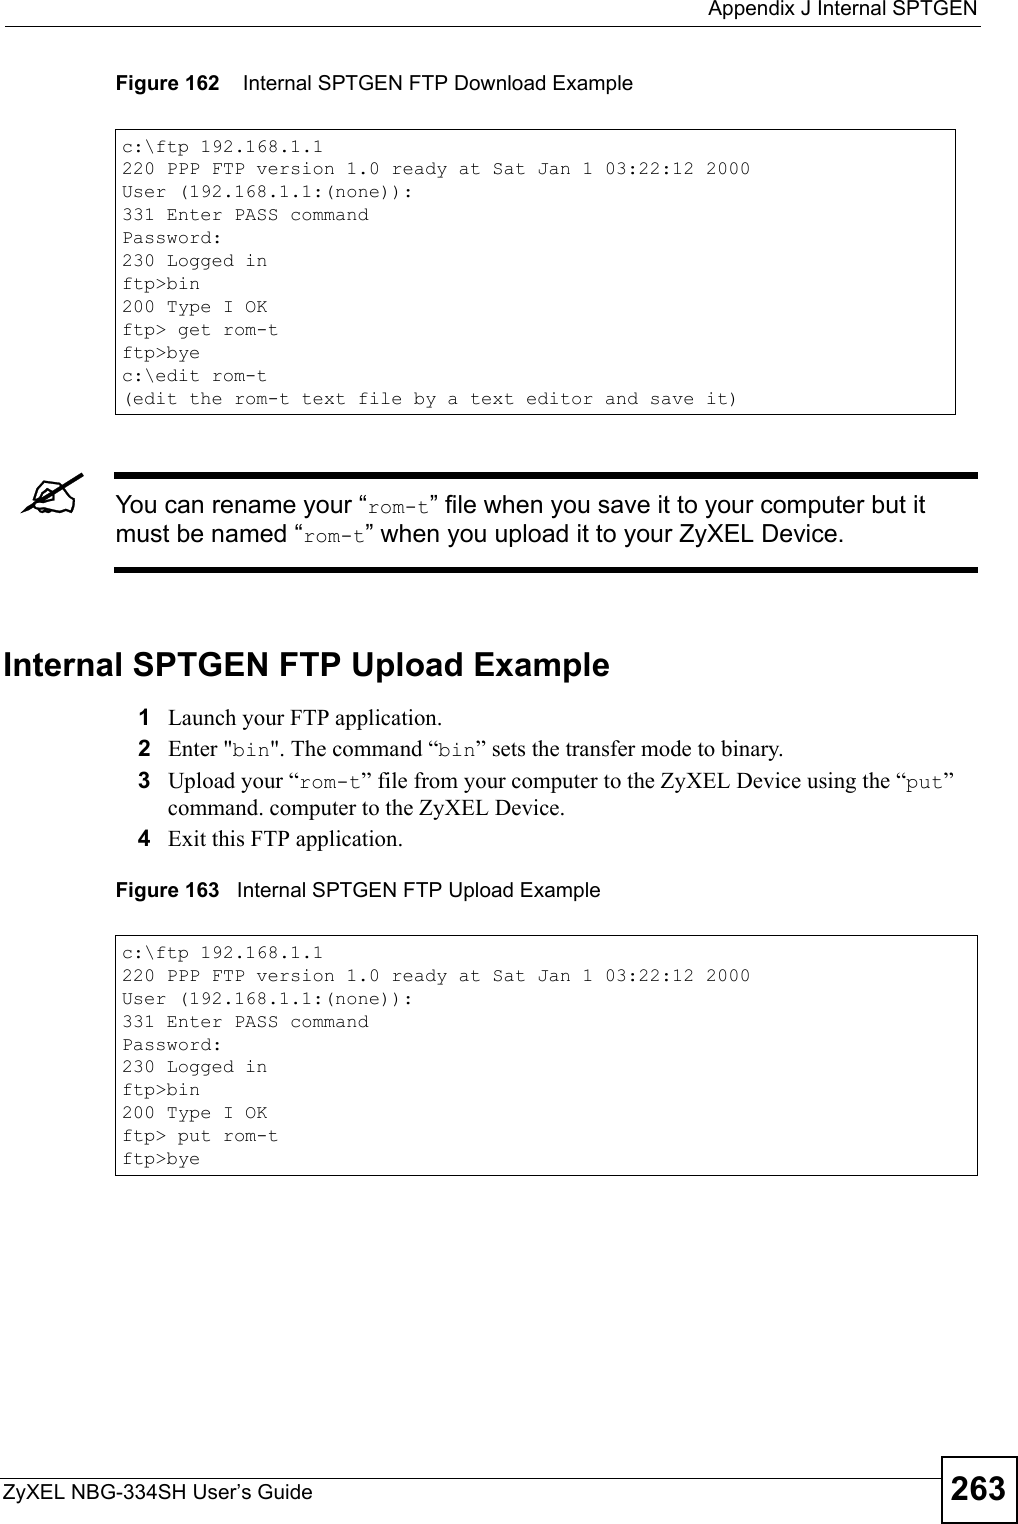  Appendix J Internal SPTGENZyXEL NBG-334SH User’s Guide 263Figure 162    Internal SPTGEN FTP Download Example&quot;You can rename your “rom-t” file when you save it to your computer but it must be named “rom-t” when you upload it to your ZyXEL Device.Internal SPTGEN FTP Upload Example1Launch your FTP application.2Enter &quot;bin&quot;. The command “bin” sets the transfer mode to binary.3Upload your “rom-t” file from your computer to the ZyXEL Device using the “put” command. computer to the ZyXEL Device.4Exit this FTP application.Figure 163   Internal SPTGEN FTP Upload Examplec:\ftp 192.168.1.1220 PPP FTP version 1.0 ready at Sat Jan 1 03:22:12 2000User (192.168.1.1:(none)):331 Enter PASS commandPassword:230 Logged inftp&gt;bin200 Type I OKftp&gt; get rom-tftp&gt;byec:\edit rom-t(edit the rom-t text file by a text editor and save it)c:\ftp 192.168.1.1220 PPP FTP version 1.0 ready at Sat Jan 1 03:22:12 2000User (192.168.1.1:(none)):331 Enter PASS commandPassword:230 Logged inftp&gt;bin200 Type I OKftp&gt; put rom-tftp&gt;bye